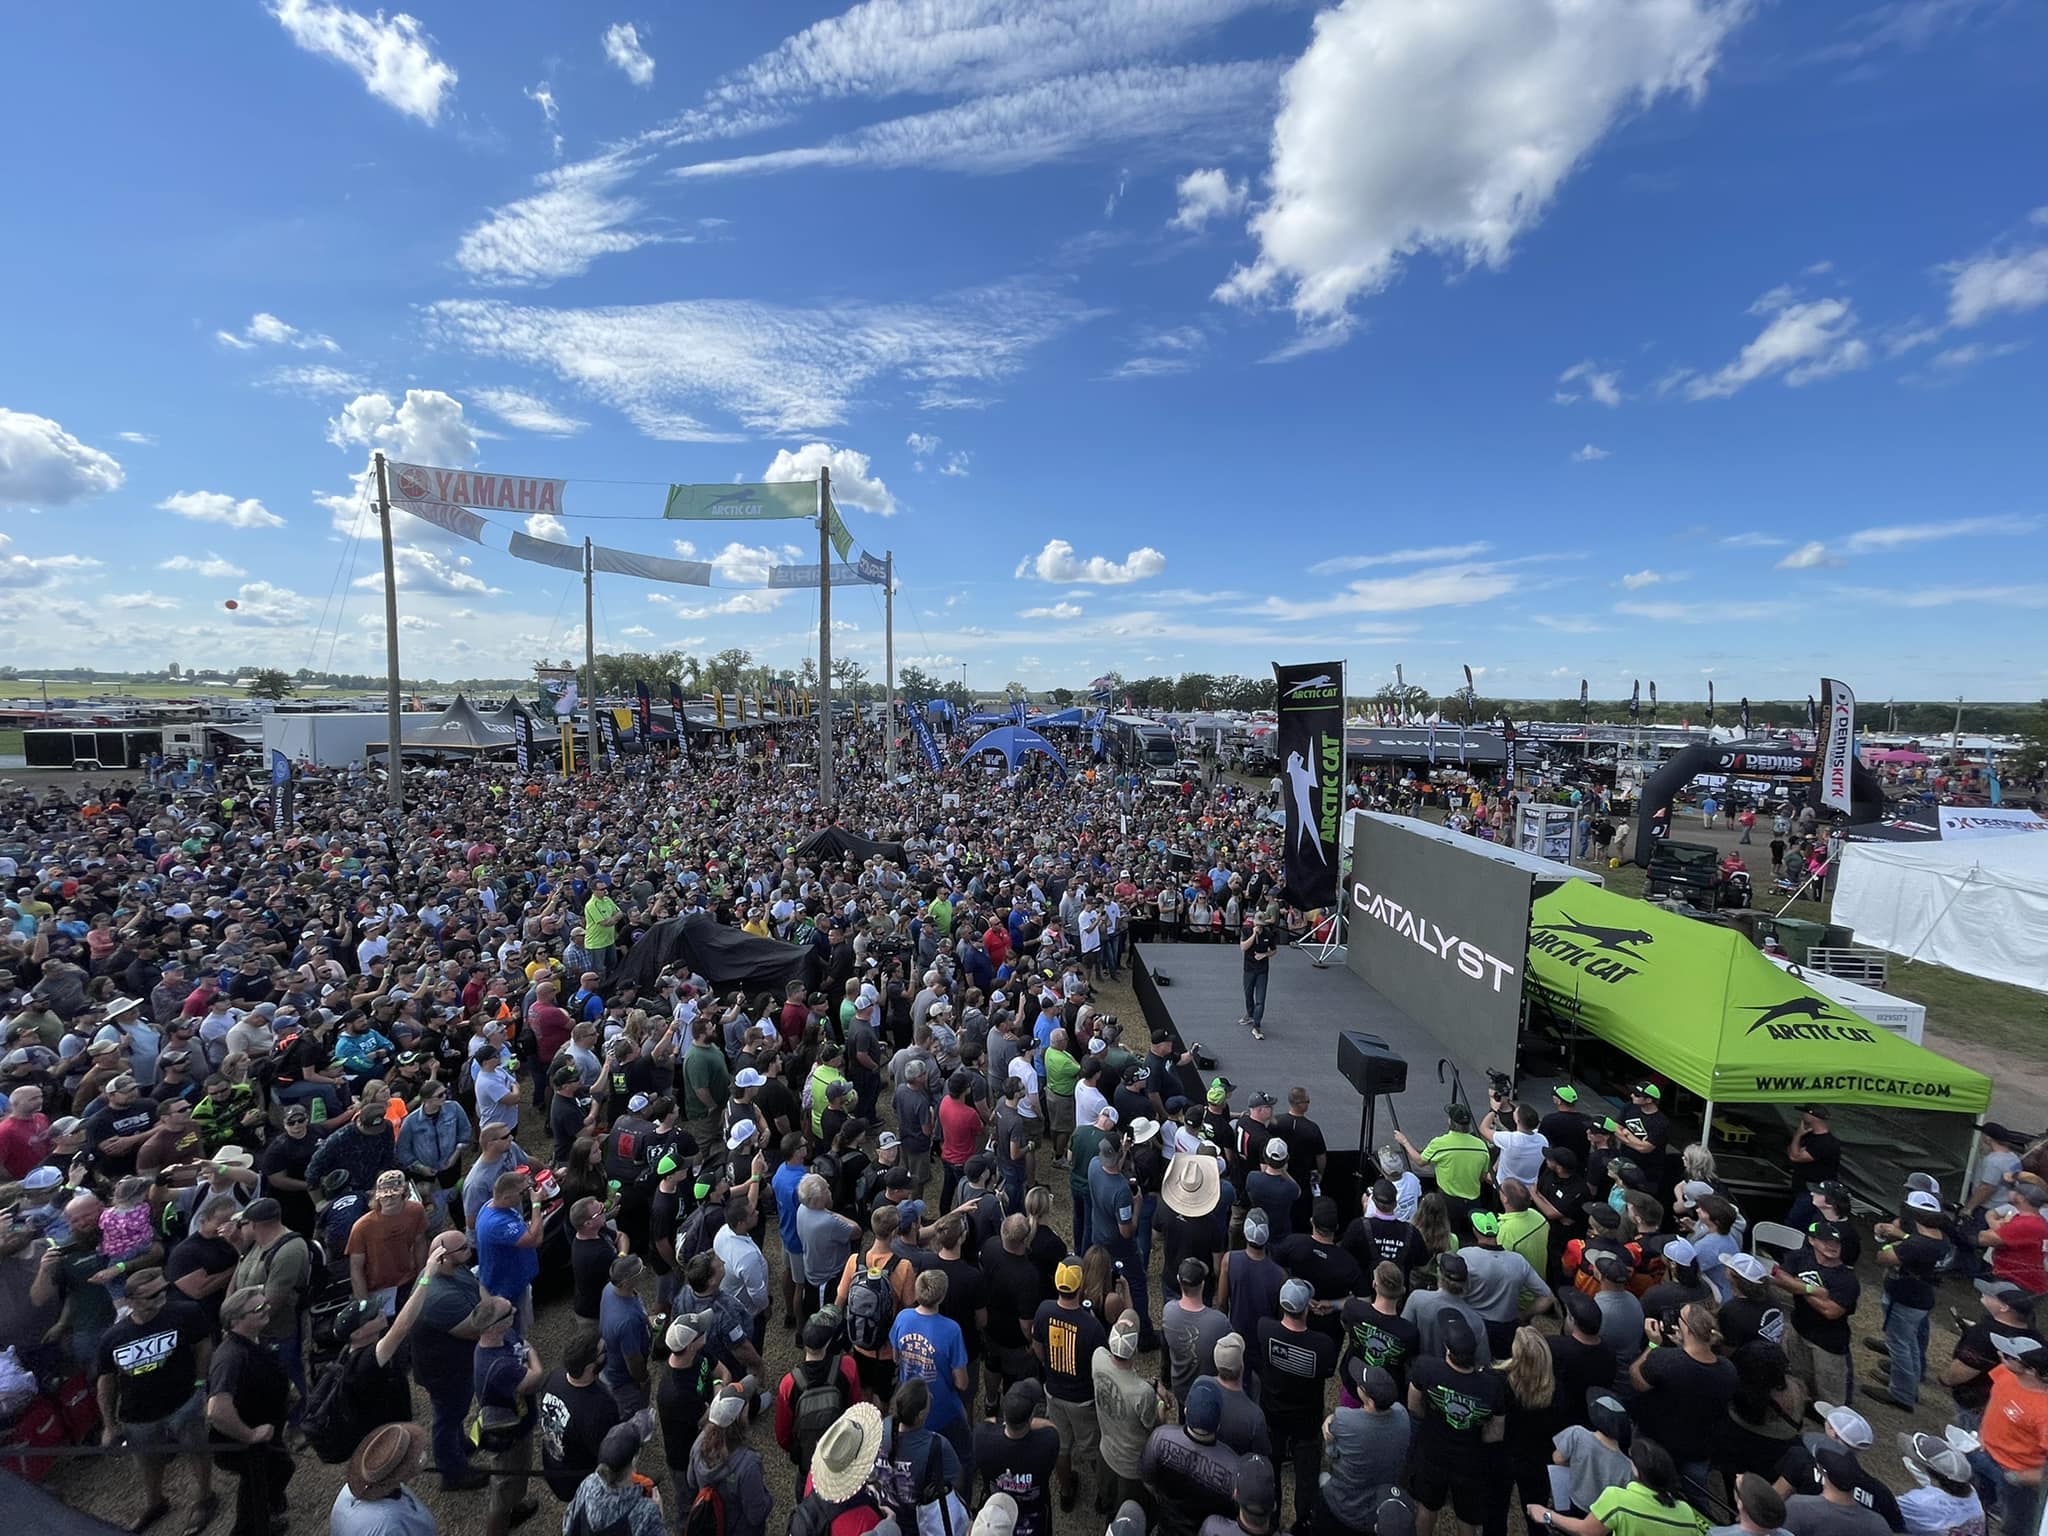 HayDays 2022 - the grand-daddy of consumer snowmobile shows.